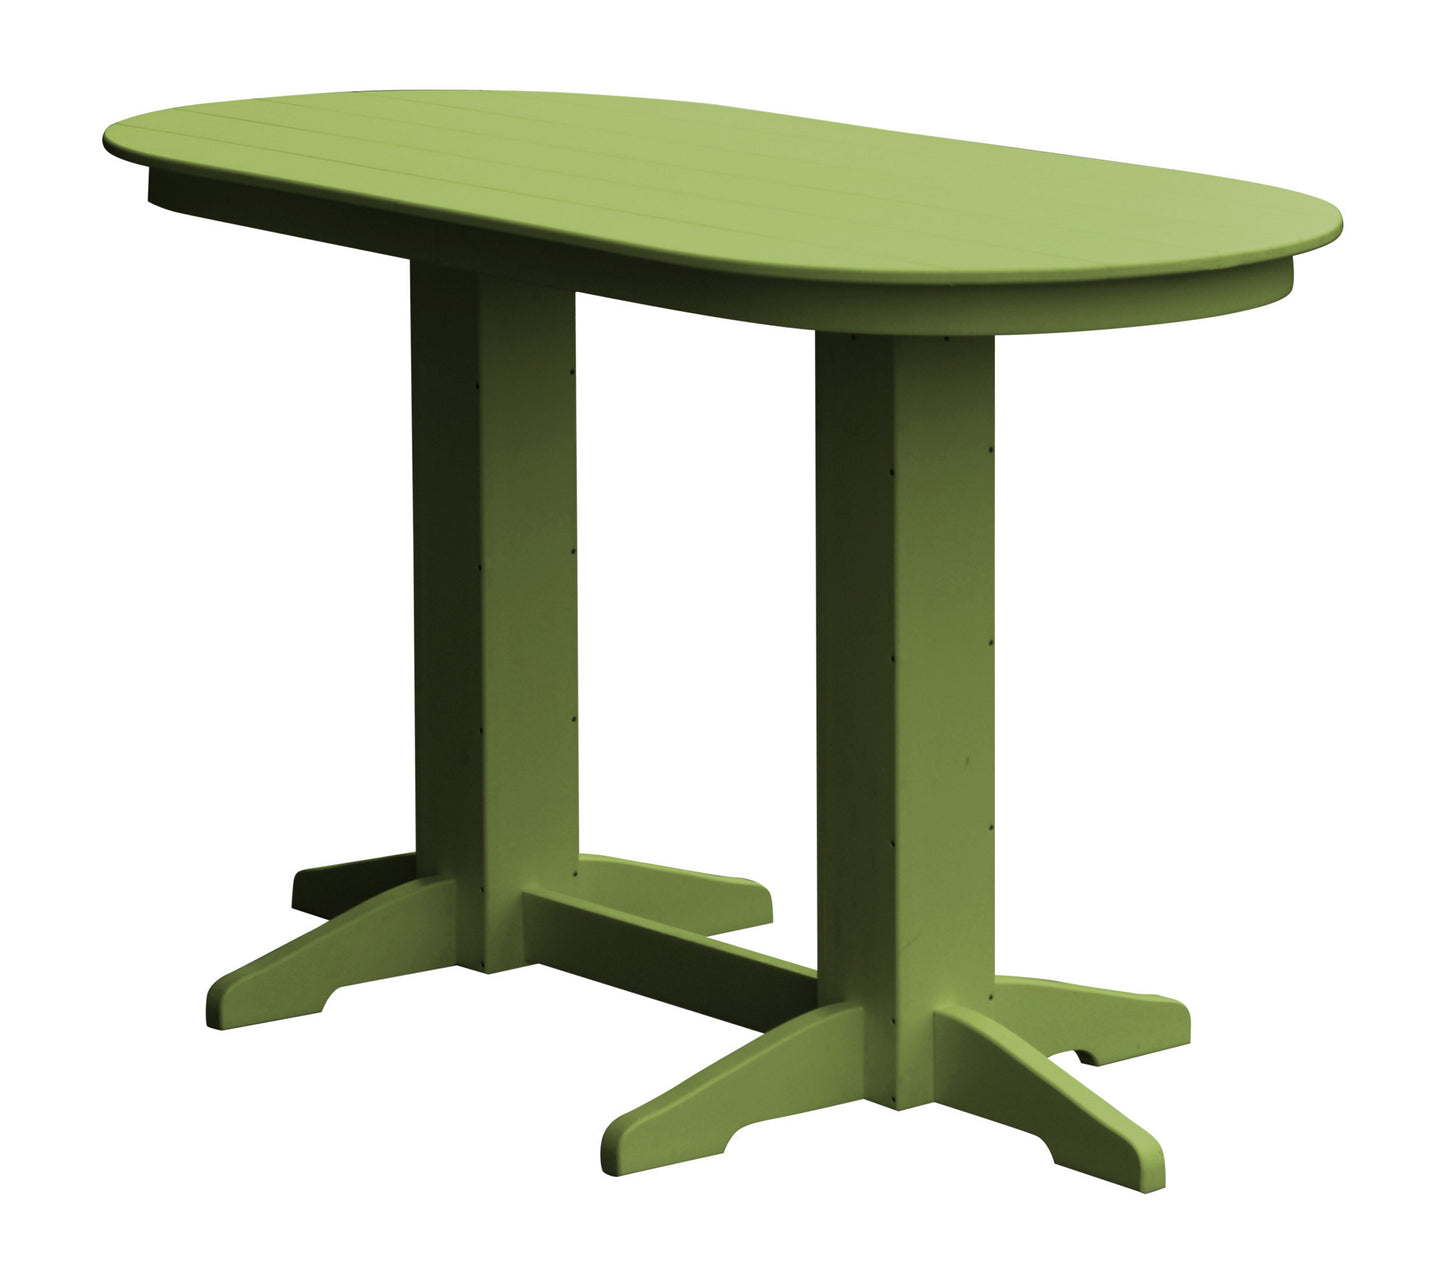 A&L Furniture Recycled Plastic 6' Oval Bar Table - Tropical Lime